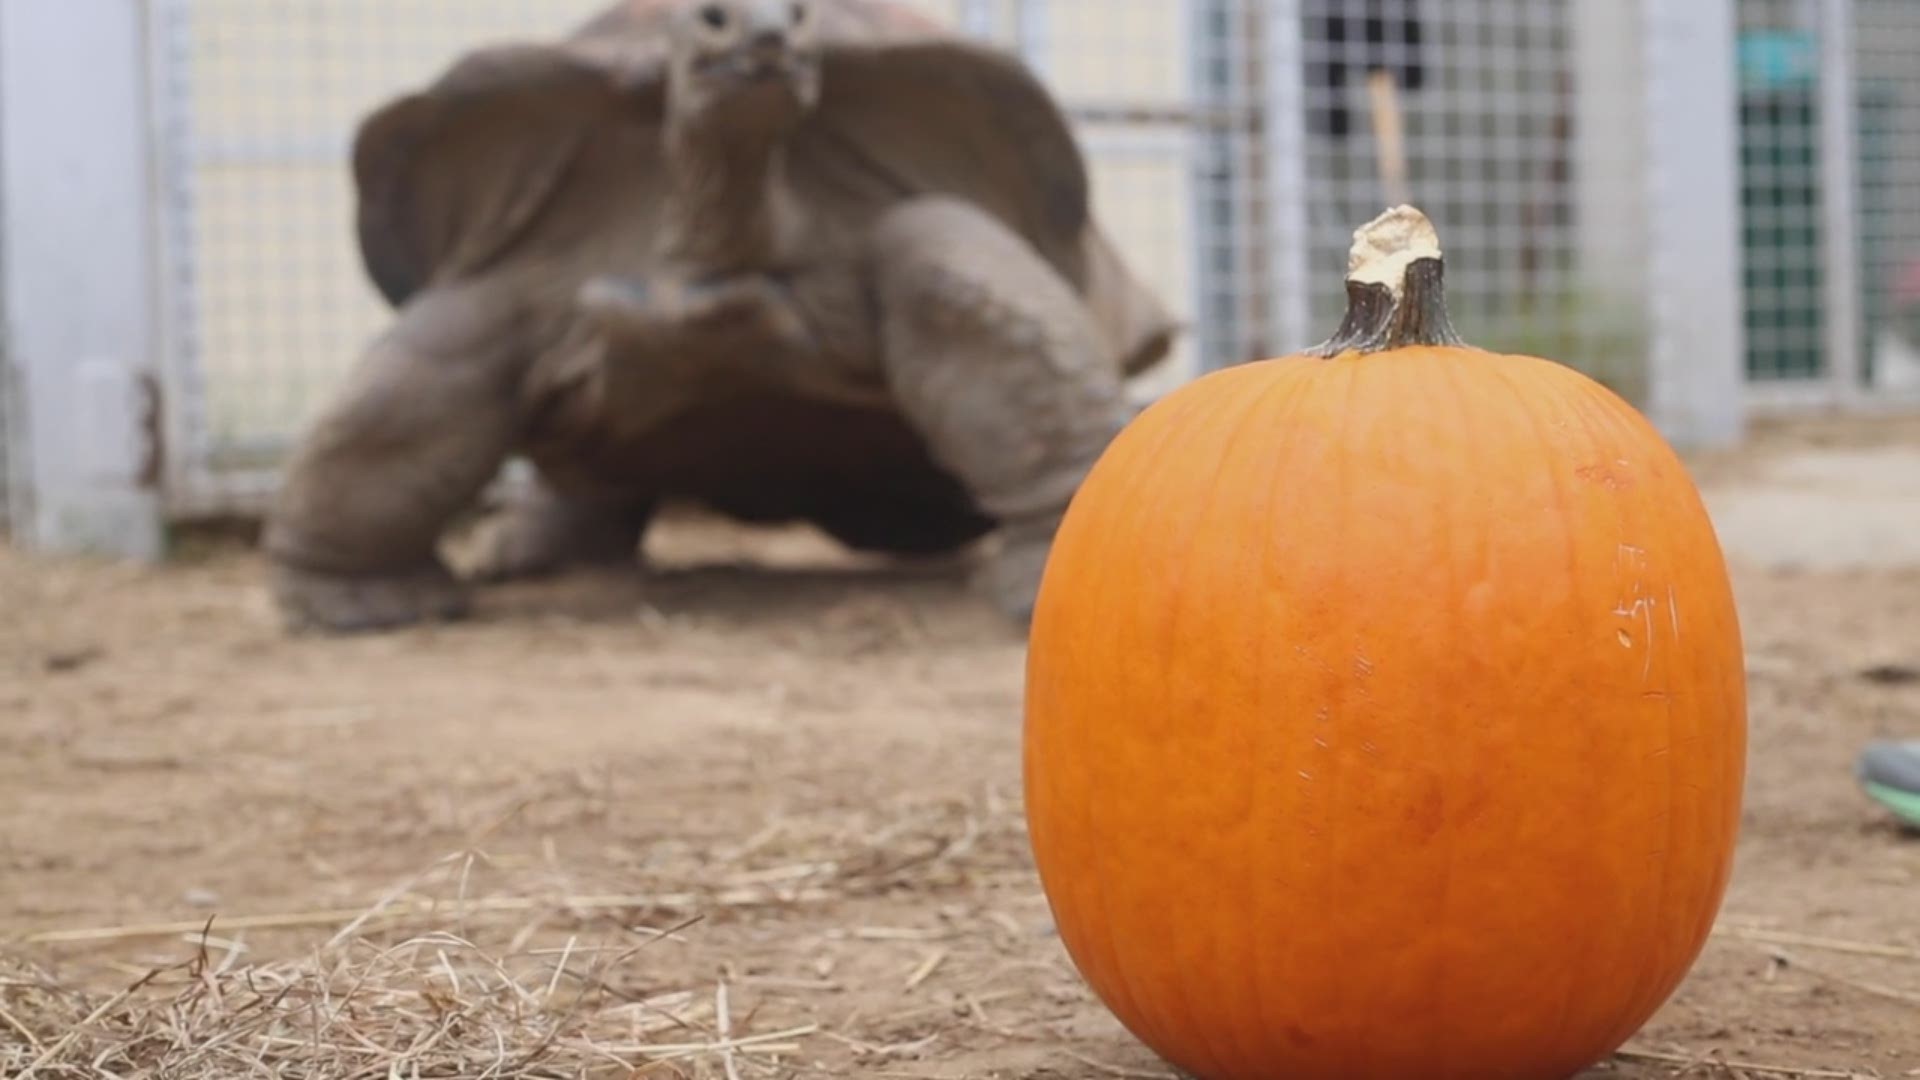 In honor of Halloween, Al the Aldabra giant tortoise at Zoo Knoxville was given a pumpkin to snack on